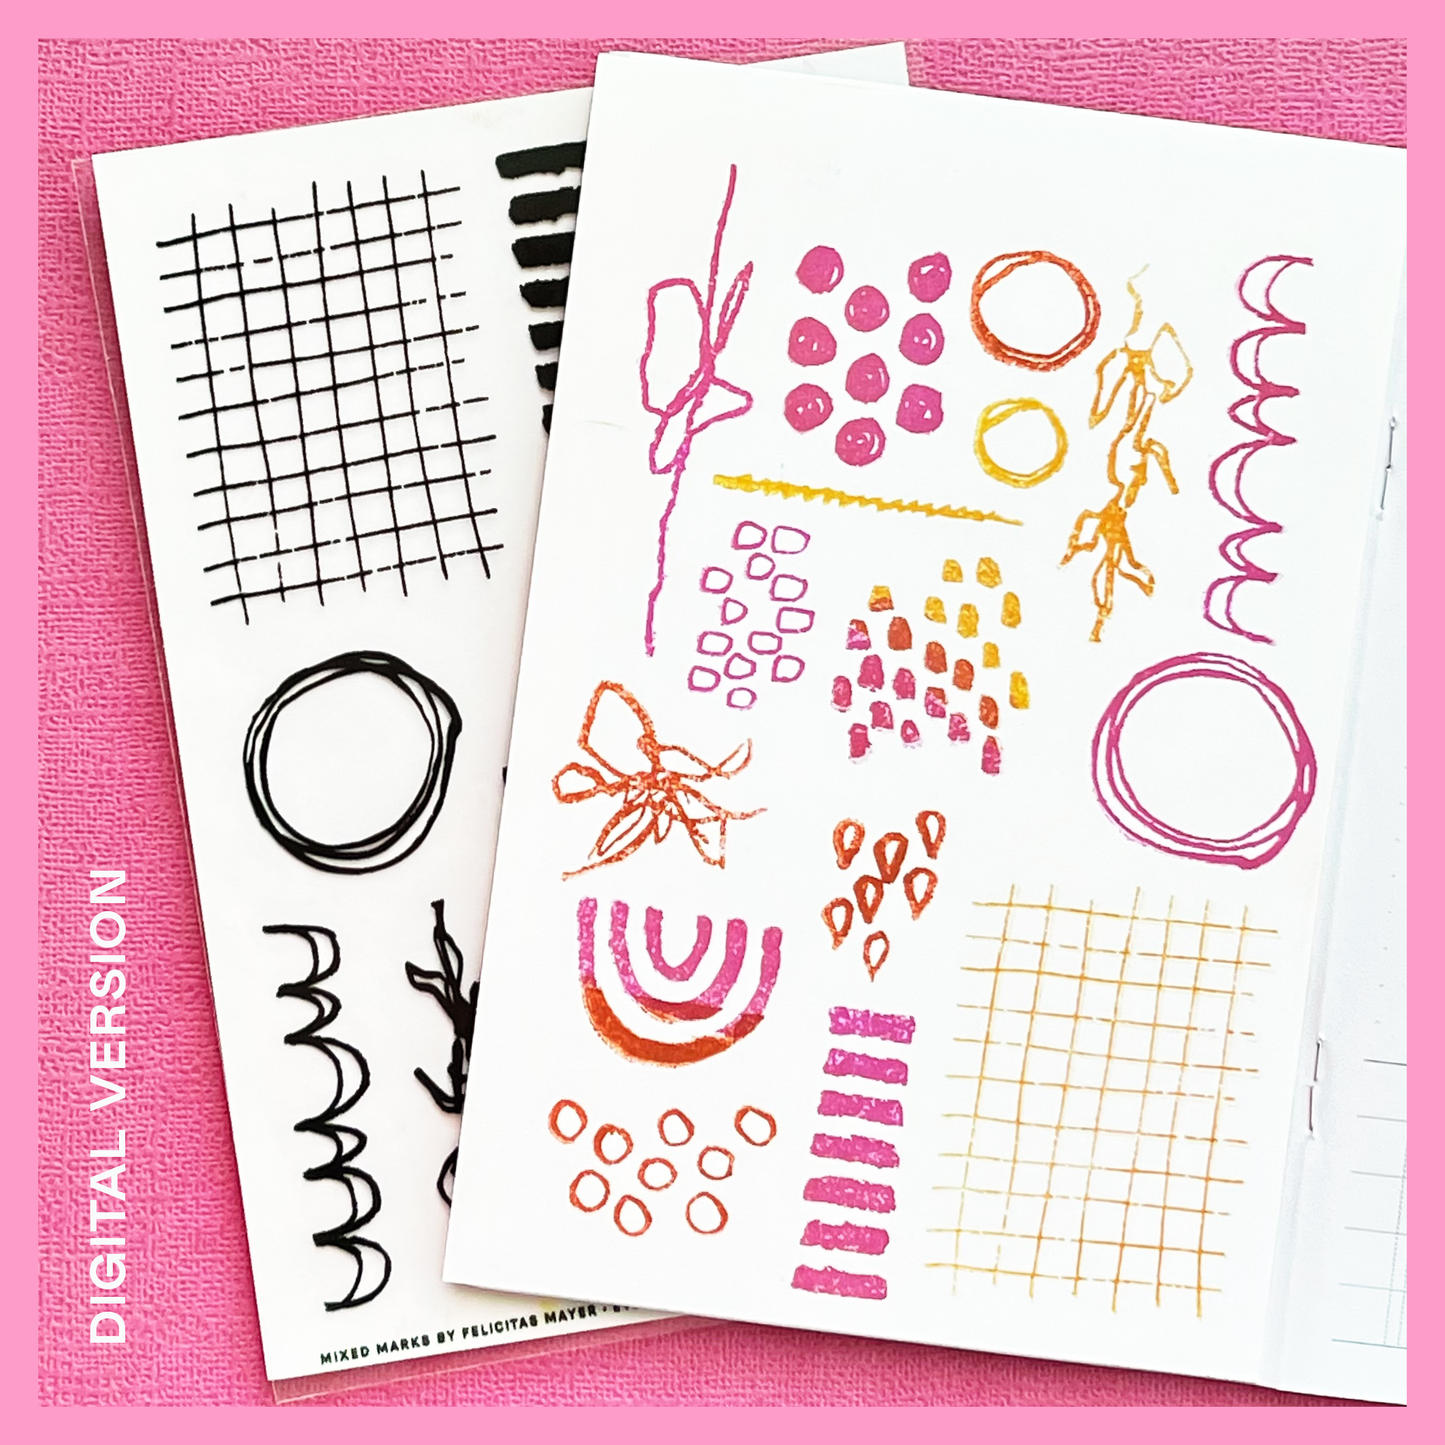 Mixed Marks by Felicitas Mayer - Digital Stamp Set